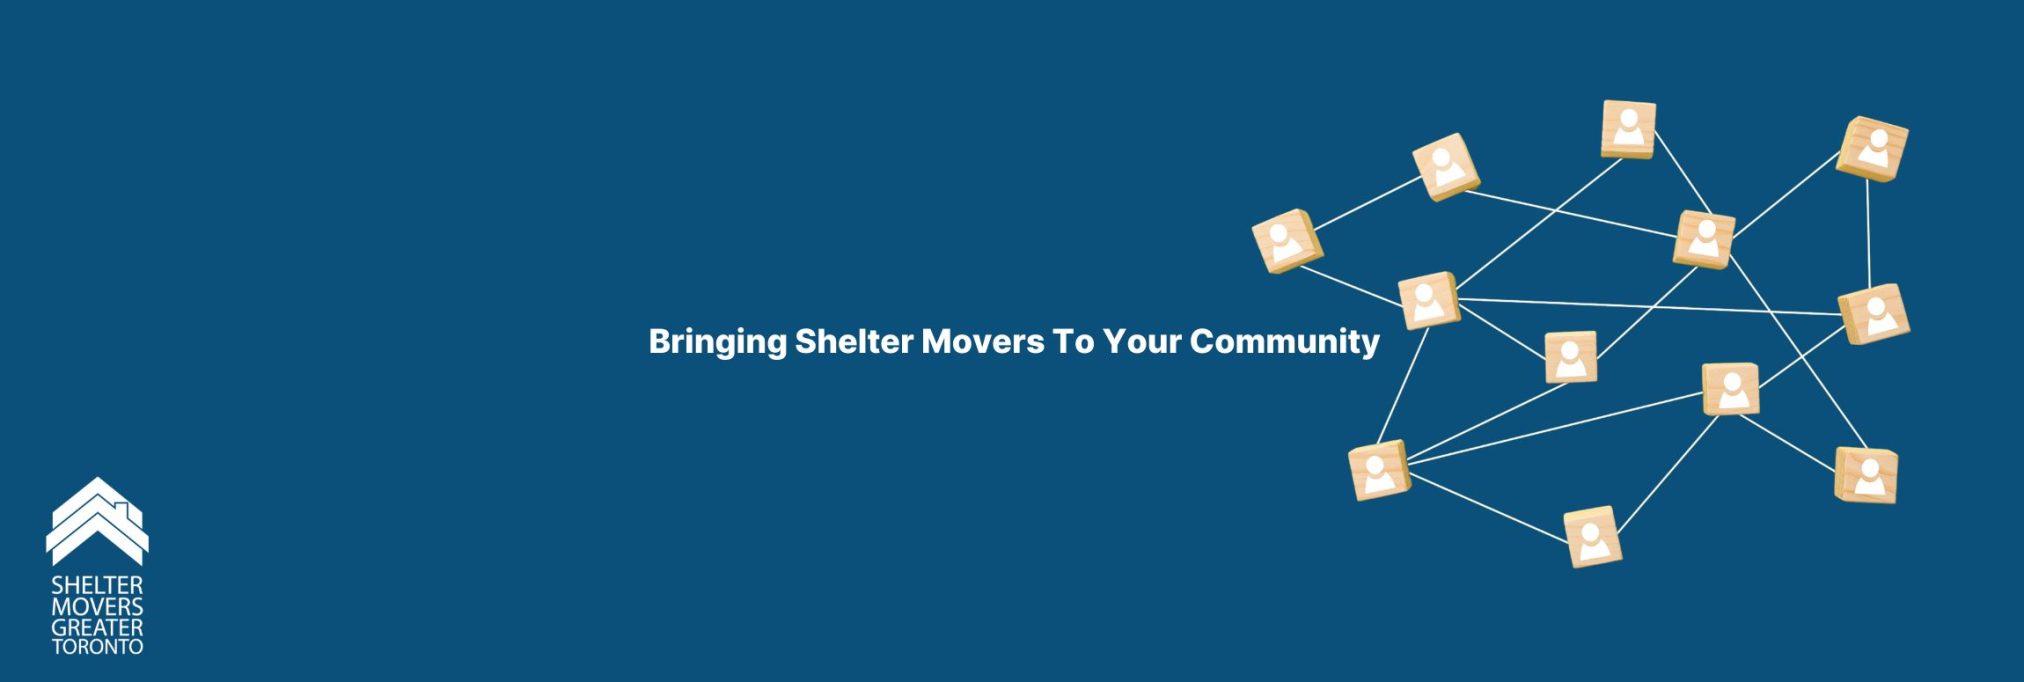 Bringing Shelter Movers To Your Community